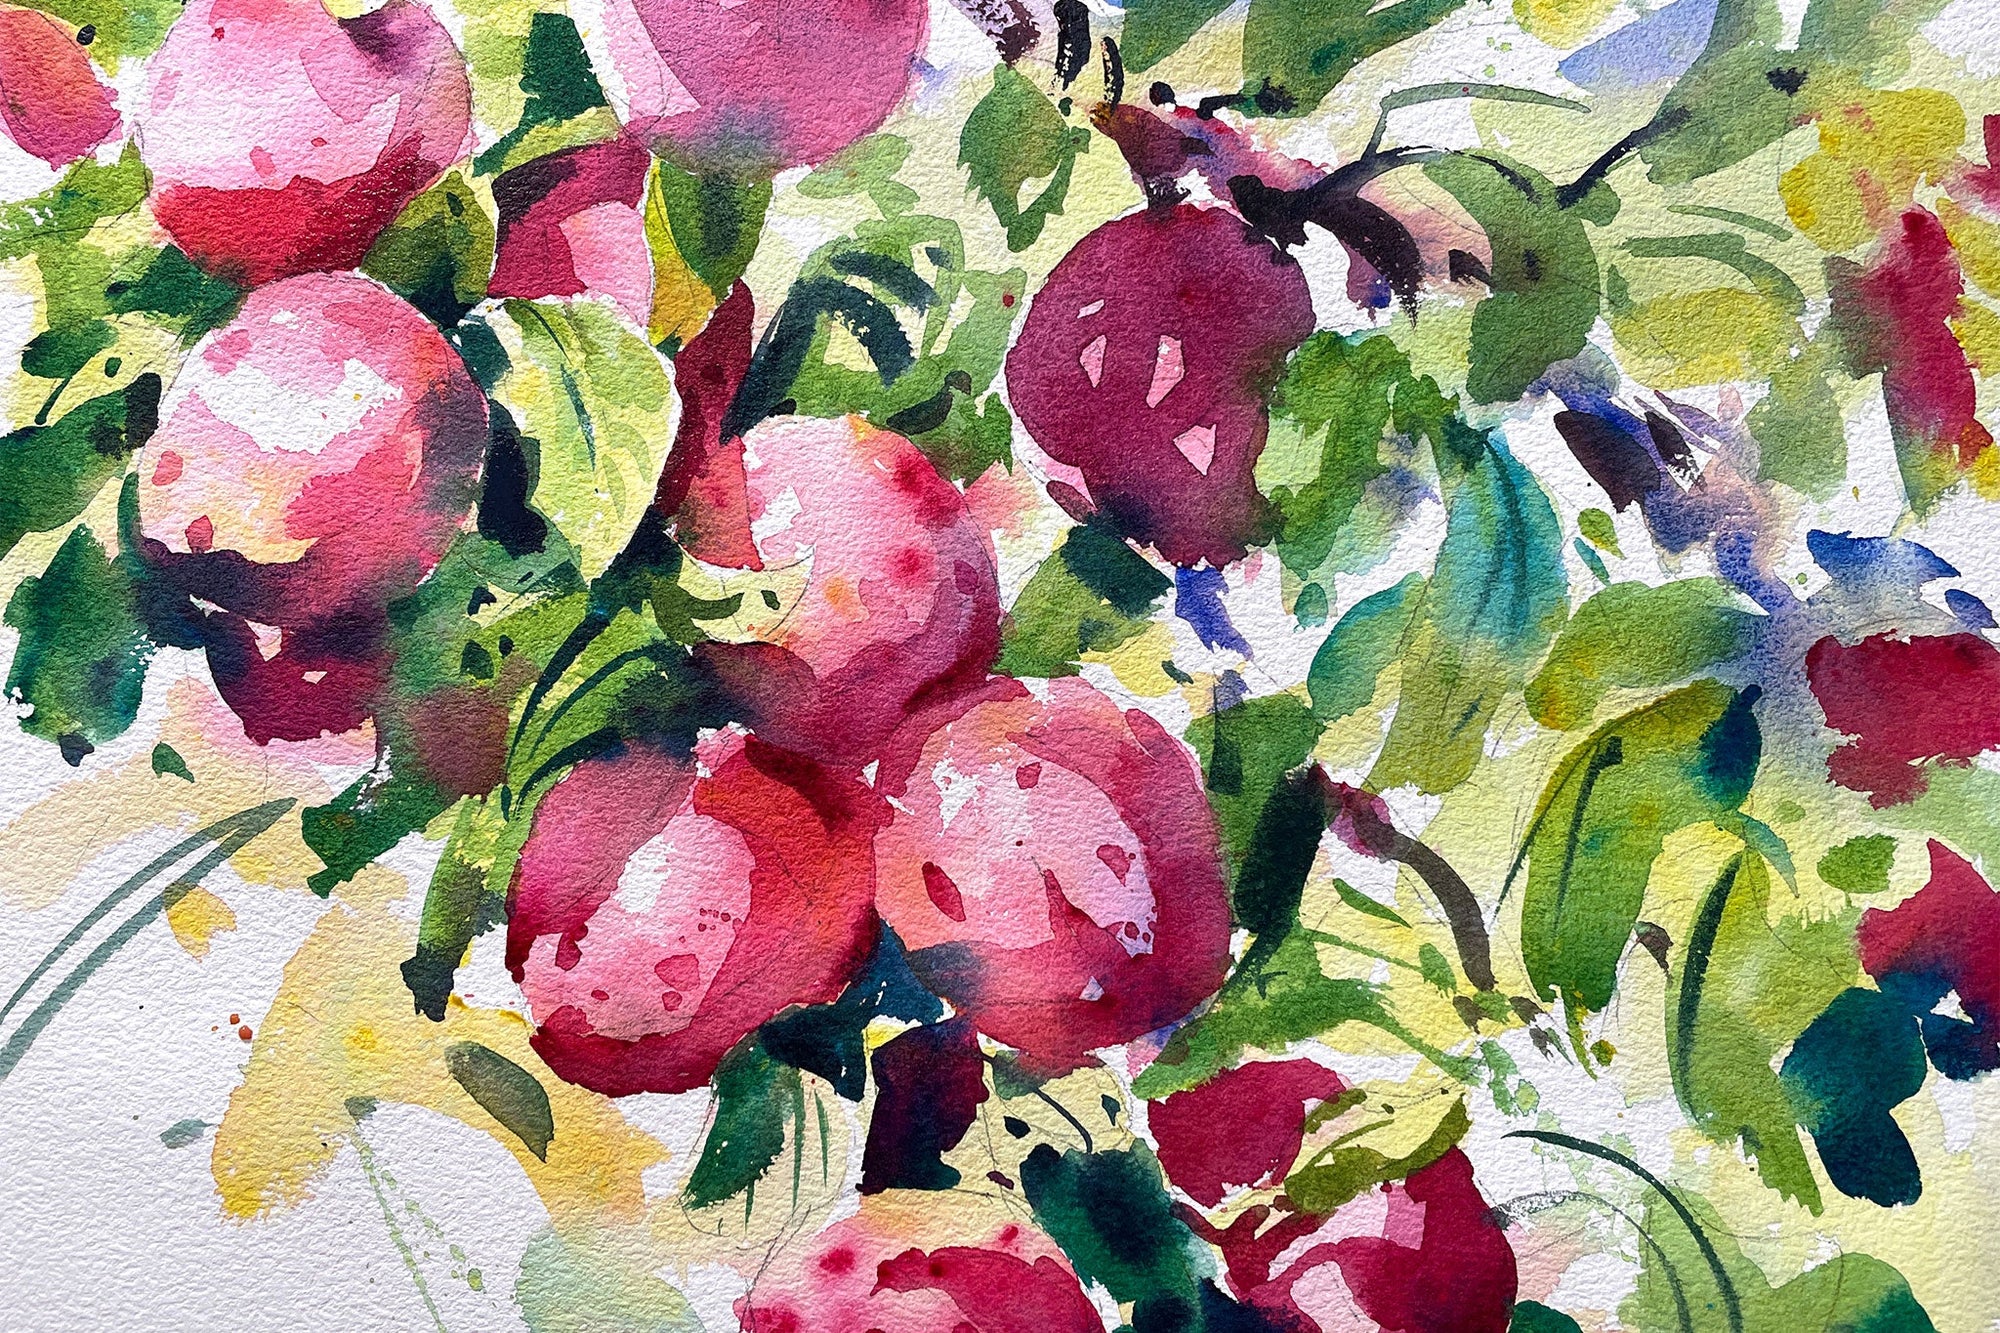 Plums - Sticking with Tonal Values & Limited Palettes